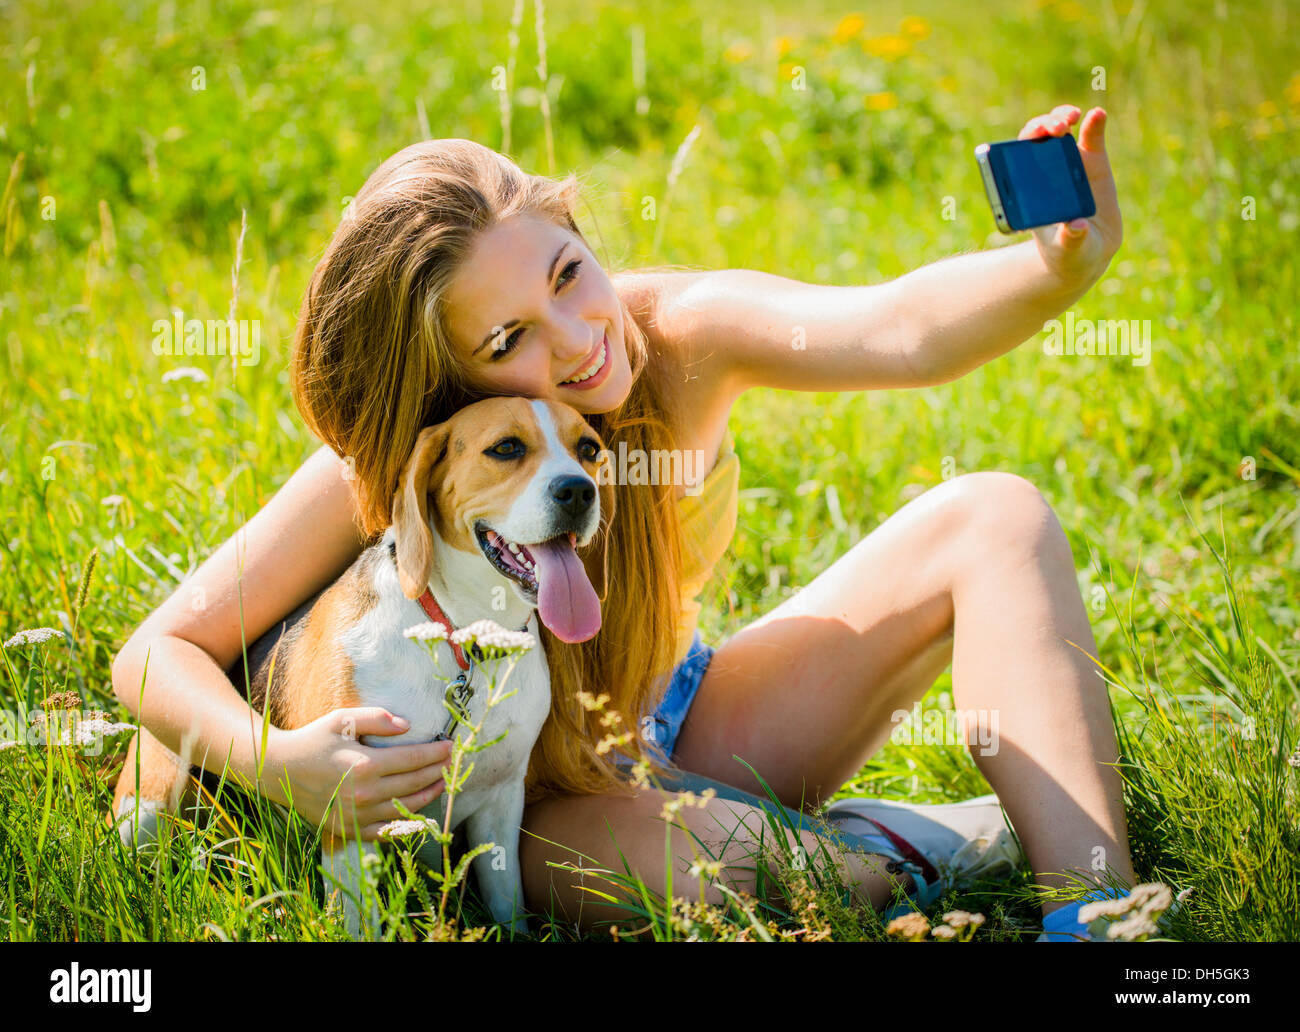 Teen girl taking photo of herself and her dog with mobile phone camera Stock  Photo - Alamy